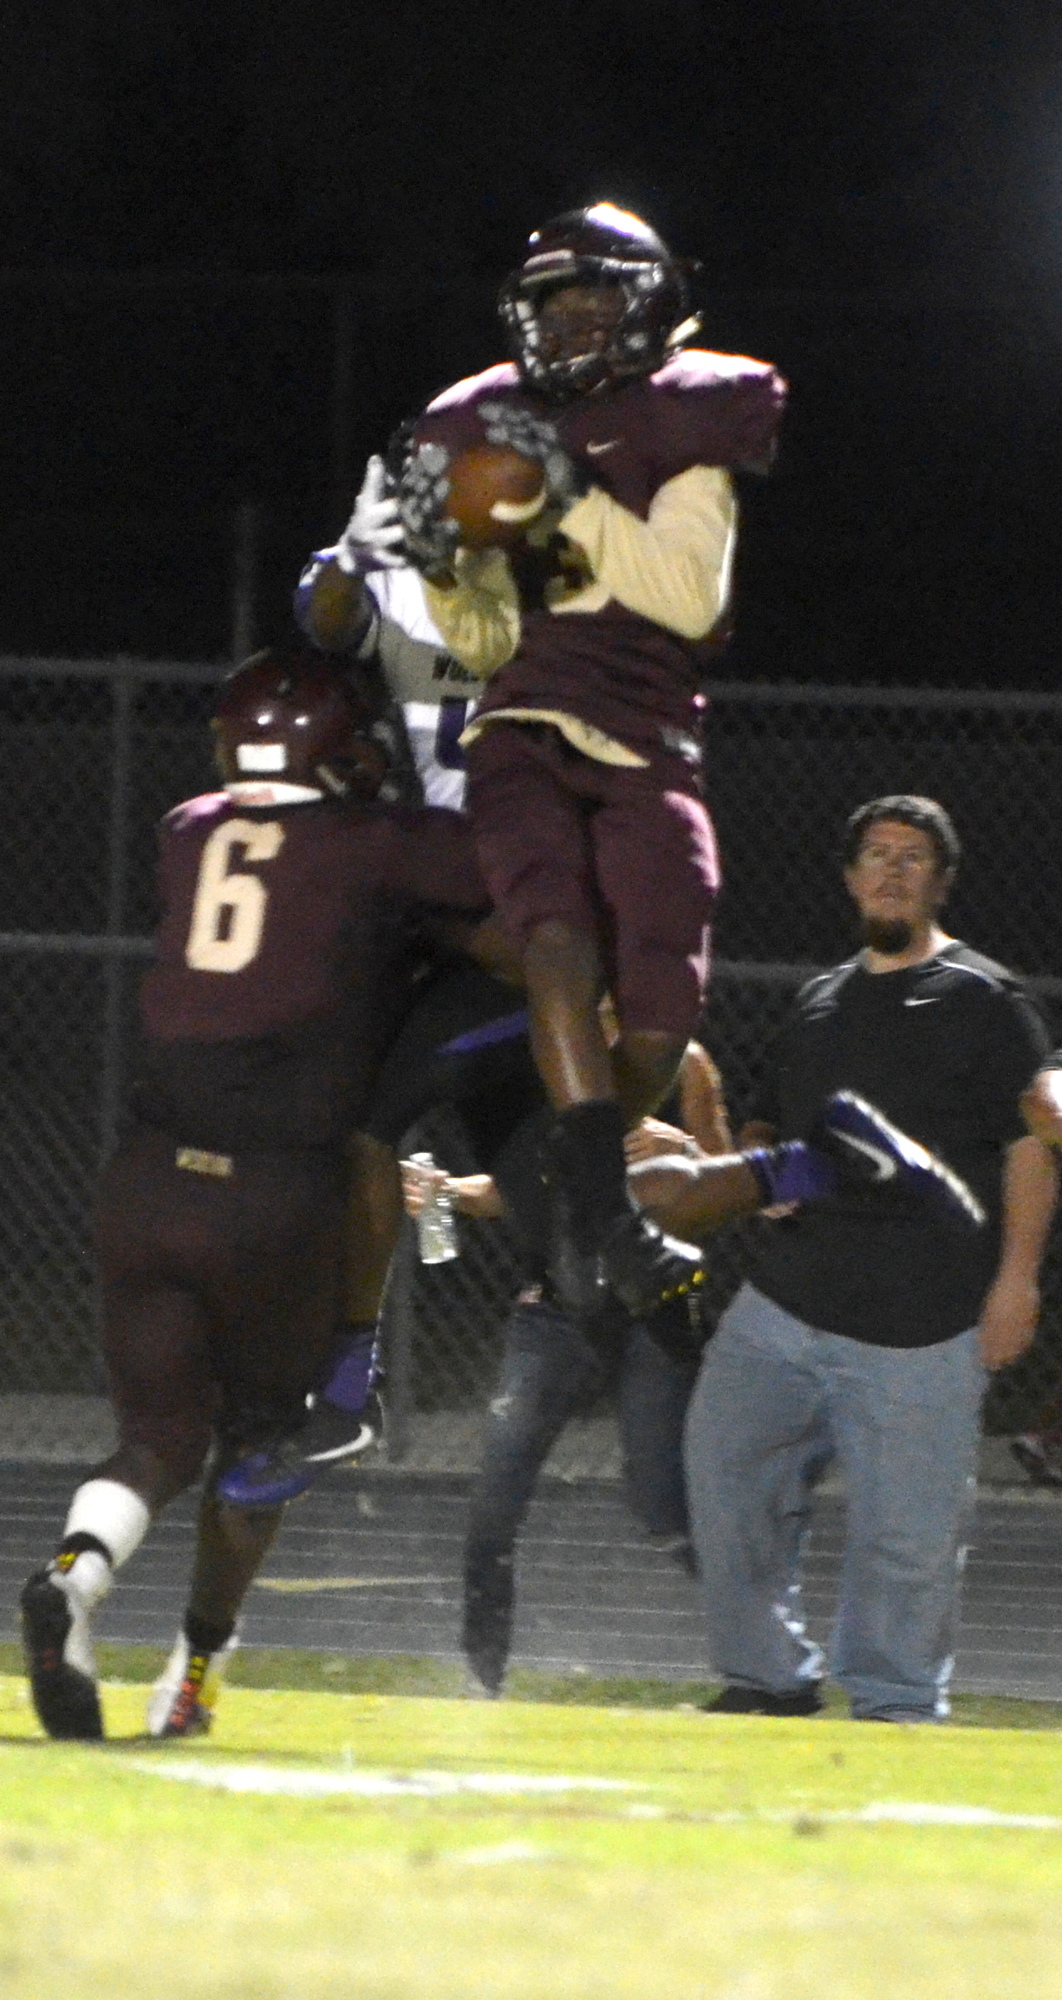 Renardo Green had an interception for the Mustangs in 19-7 defeat against Timber Creek.